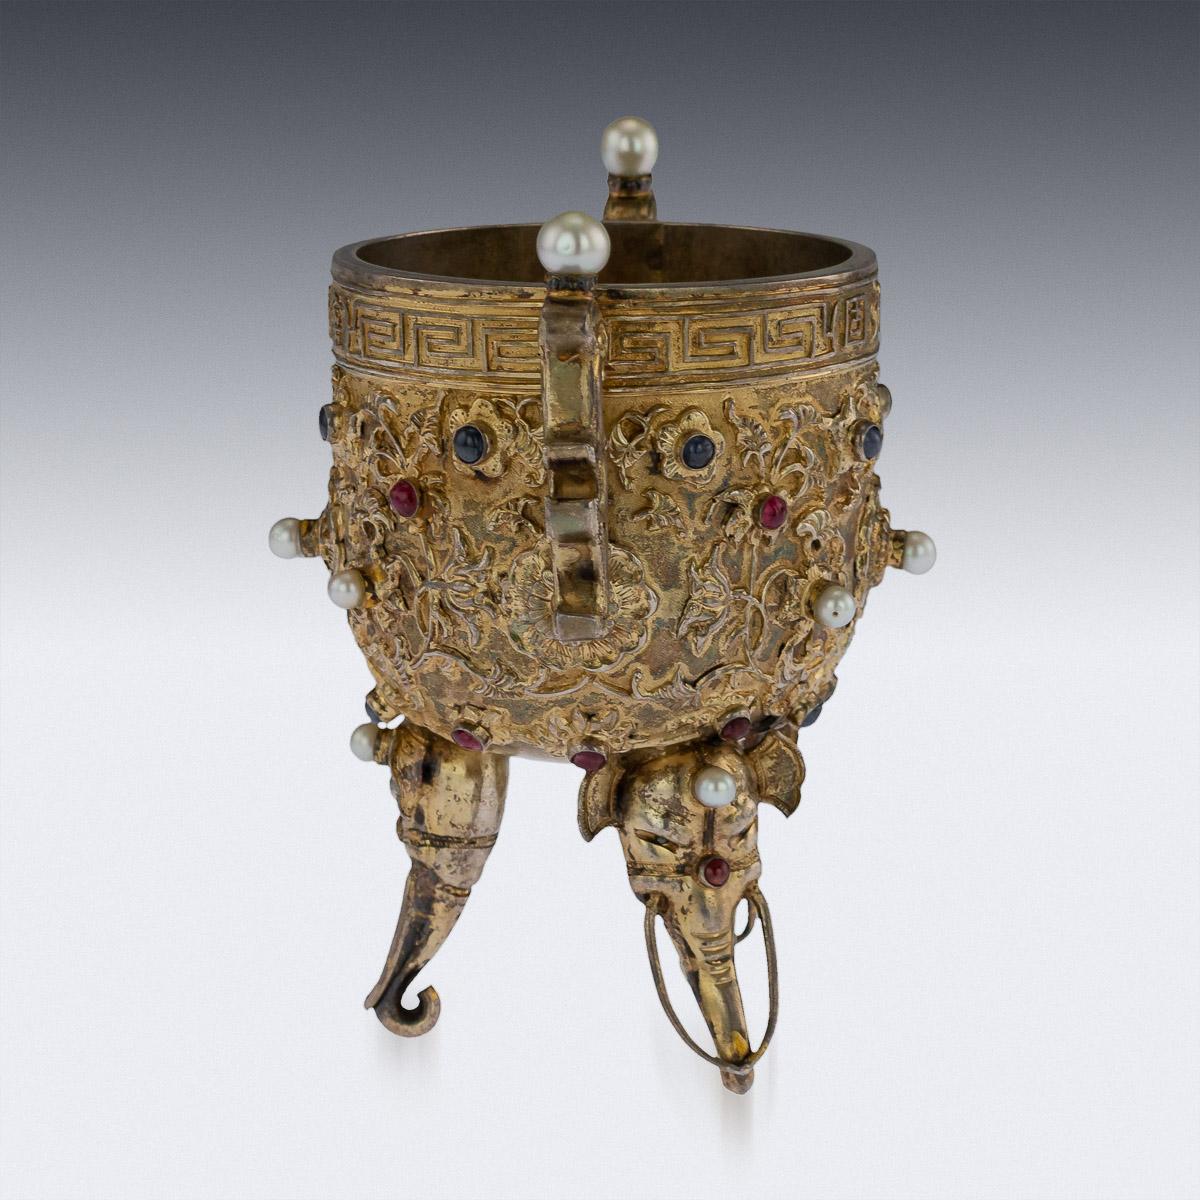 Antique late 19th century Chinese exceptionally rare copy of the 'Emperors gold wine cup'. The original gold cup has an upright mouth and a round body. It is made in the ding style with a tripod for its base. The body is covered with interlocking